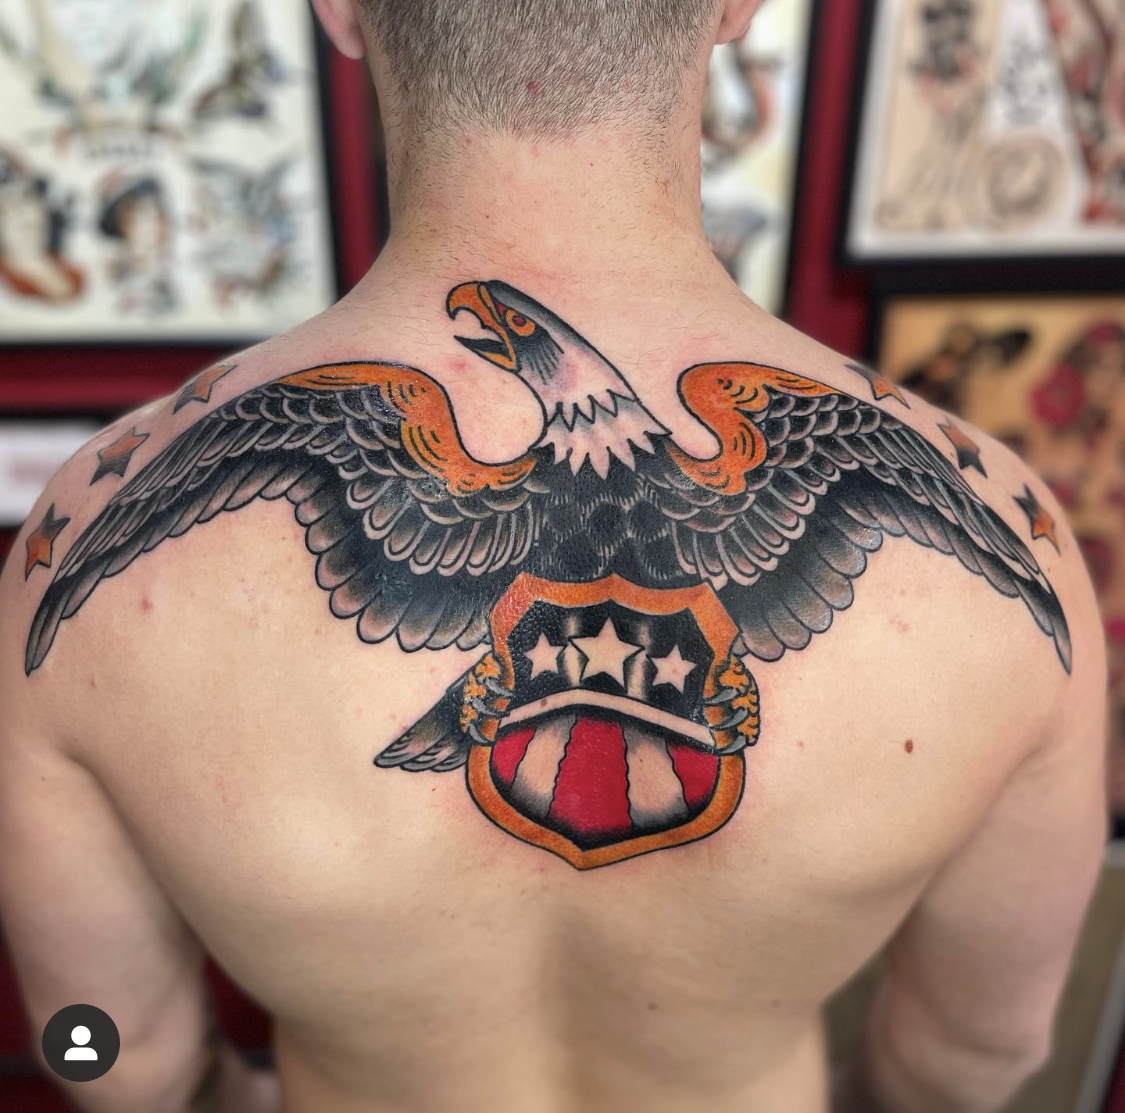 Eagle tattoo on a back from the top tattoo artist in Dallas